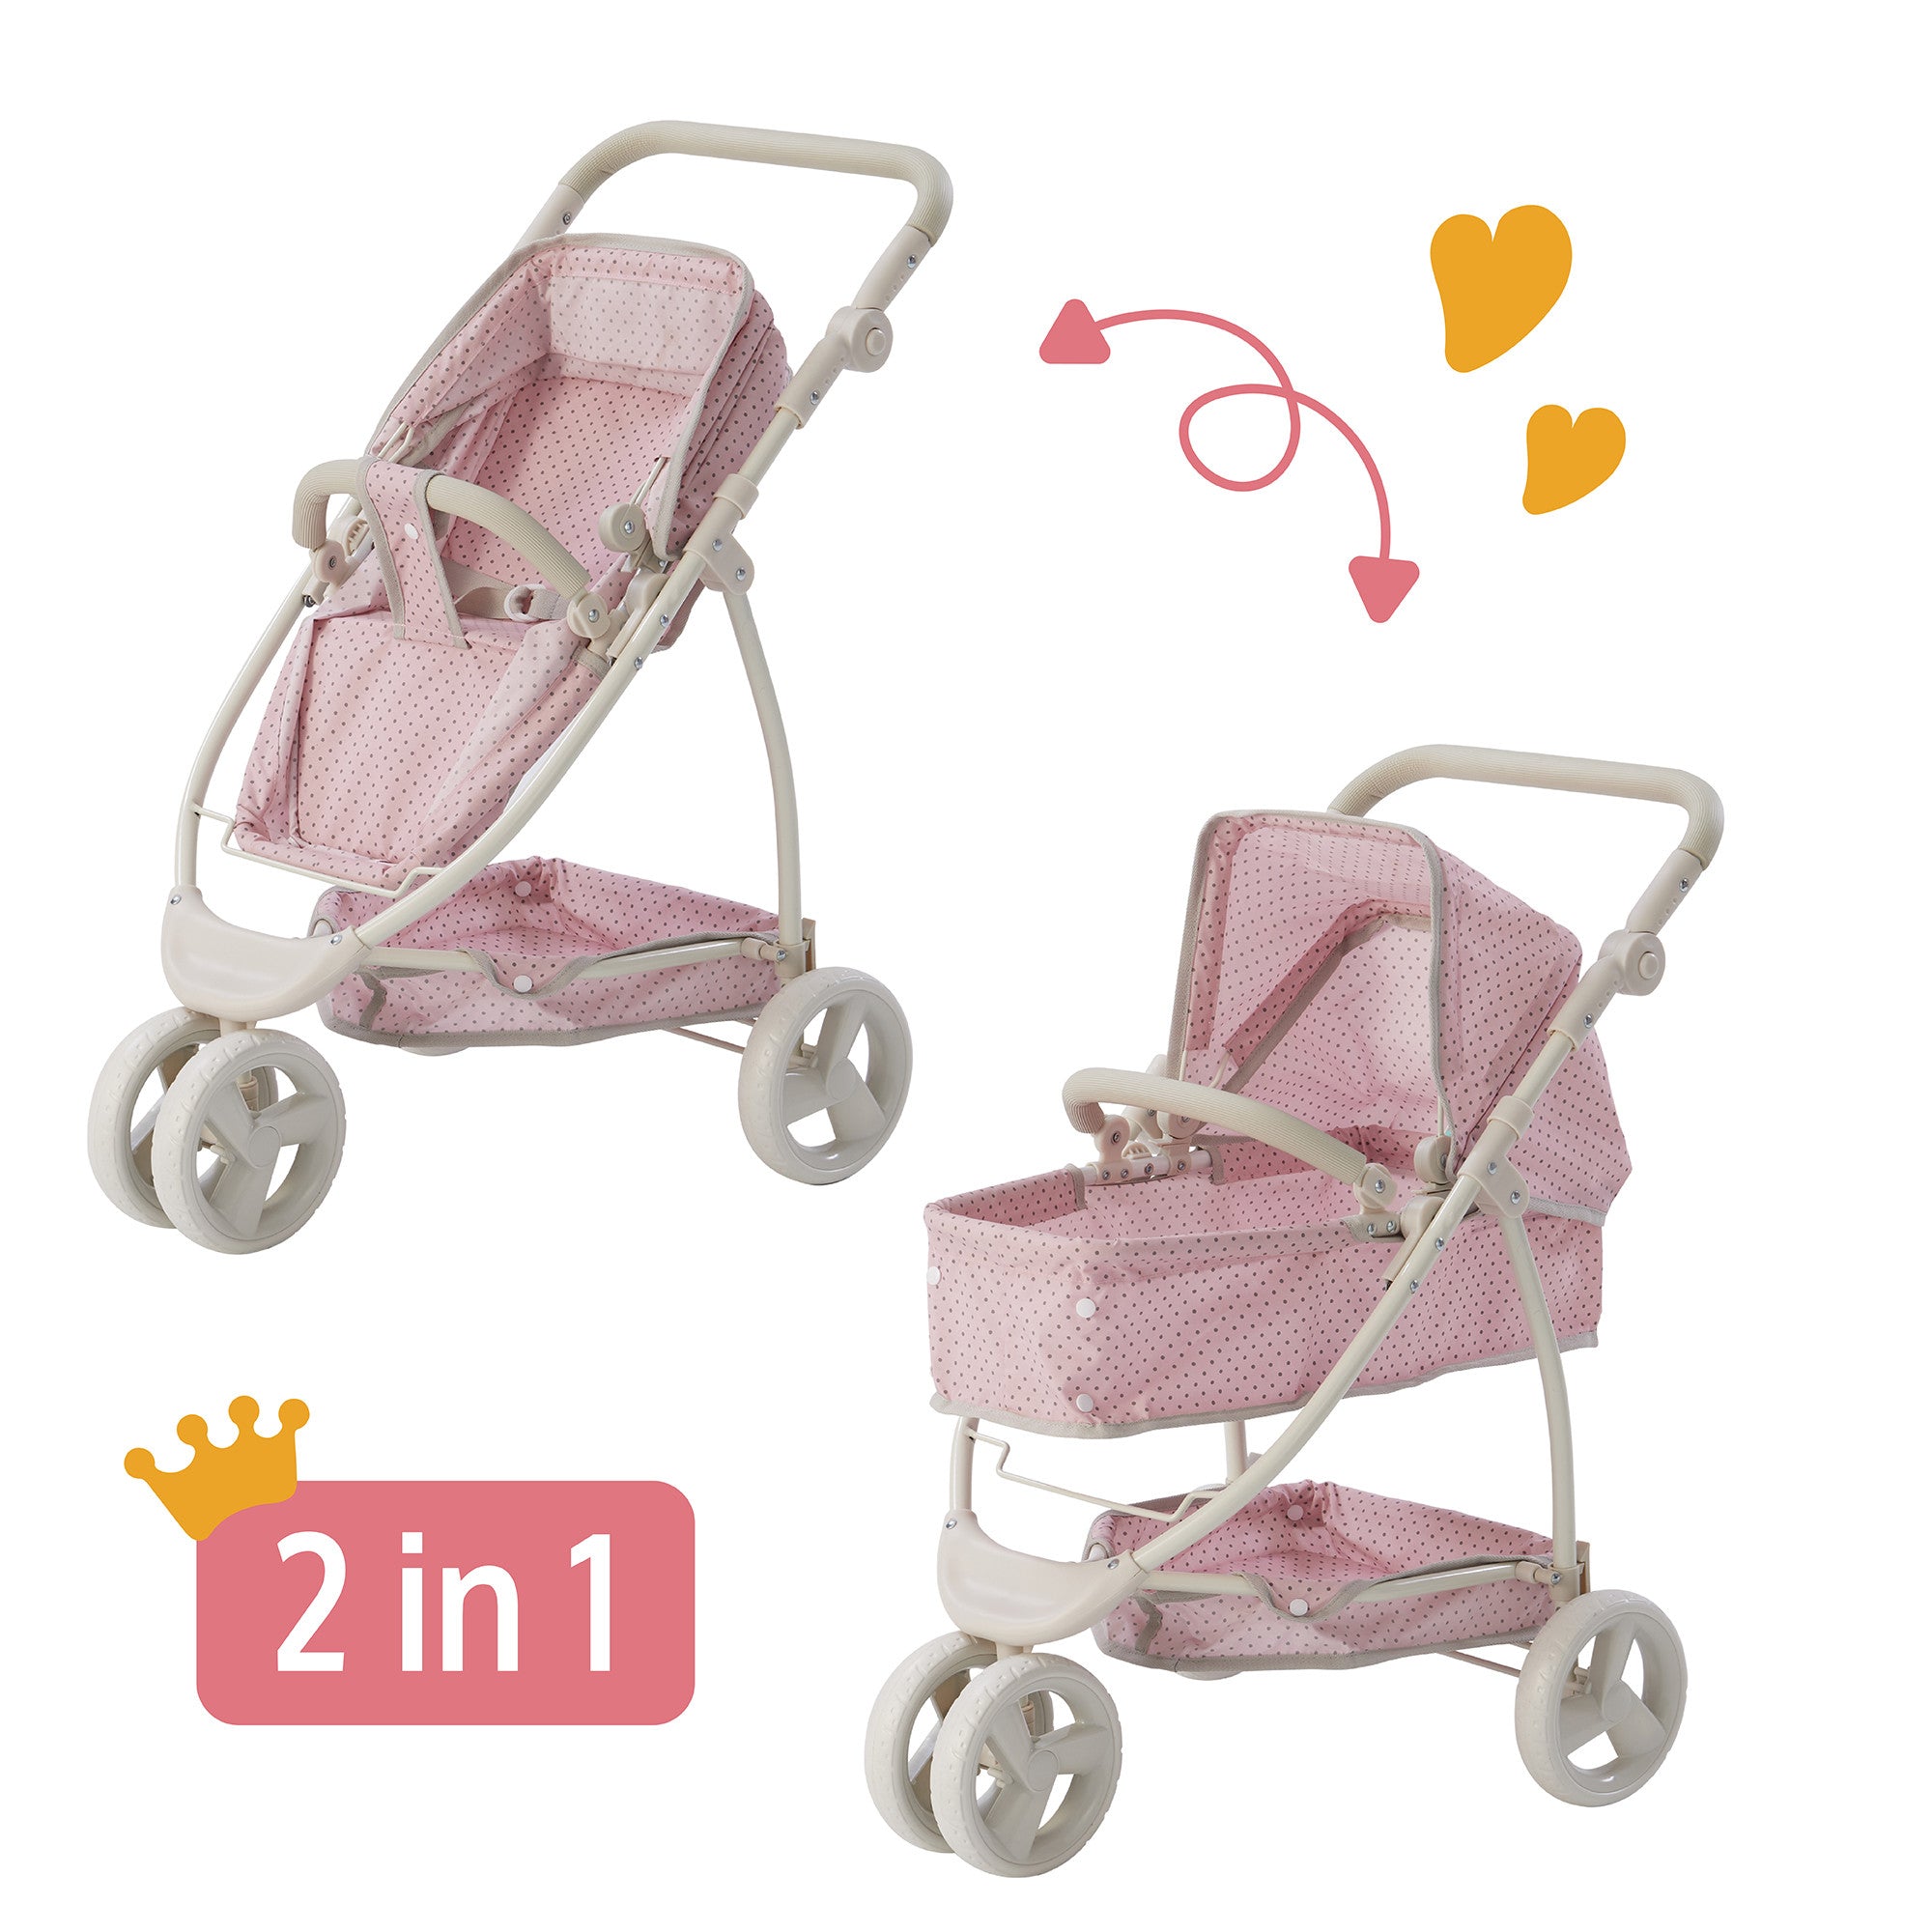 Olivia's Little World Polka Dots Princess 2-in-1 Baby Doll Stroller, Pink